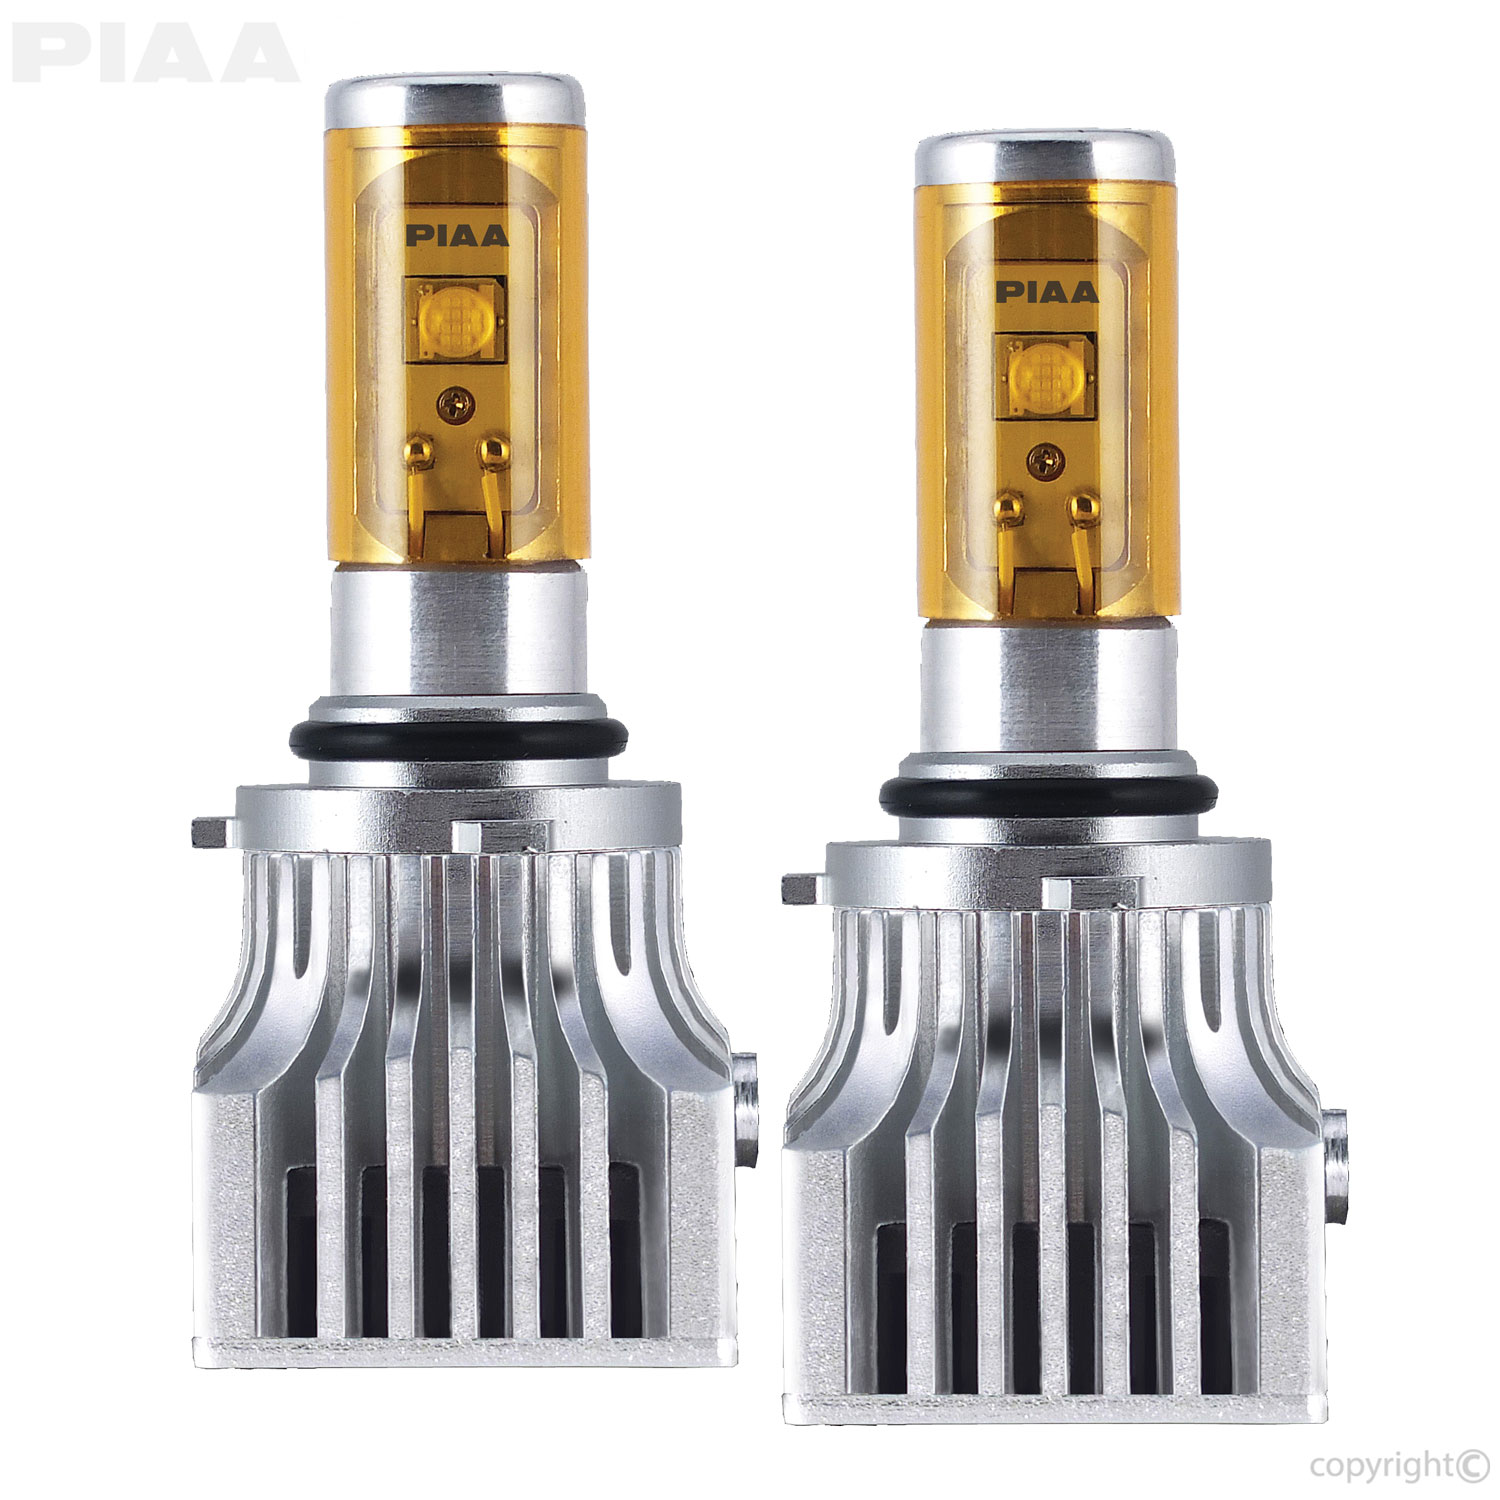 https://www.piaa.com/resize/Shared/product-images/automotive-bulbs/piaa-17501-9006-led-yellow-dual-hr.jpg?bw=1000&w=1000&bh=1000&h=1000